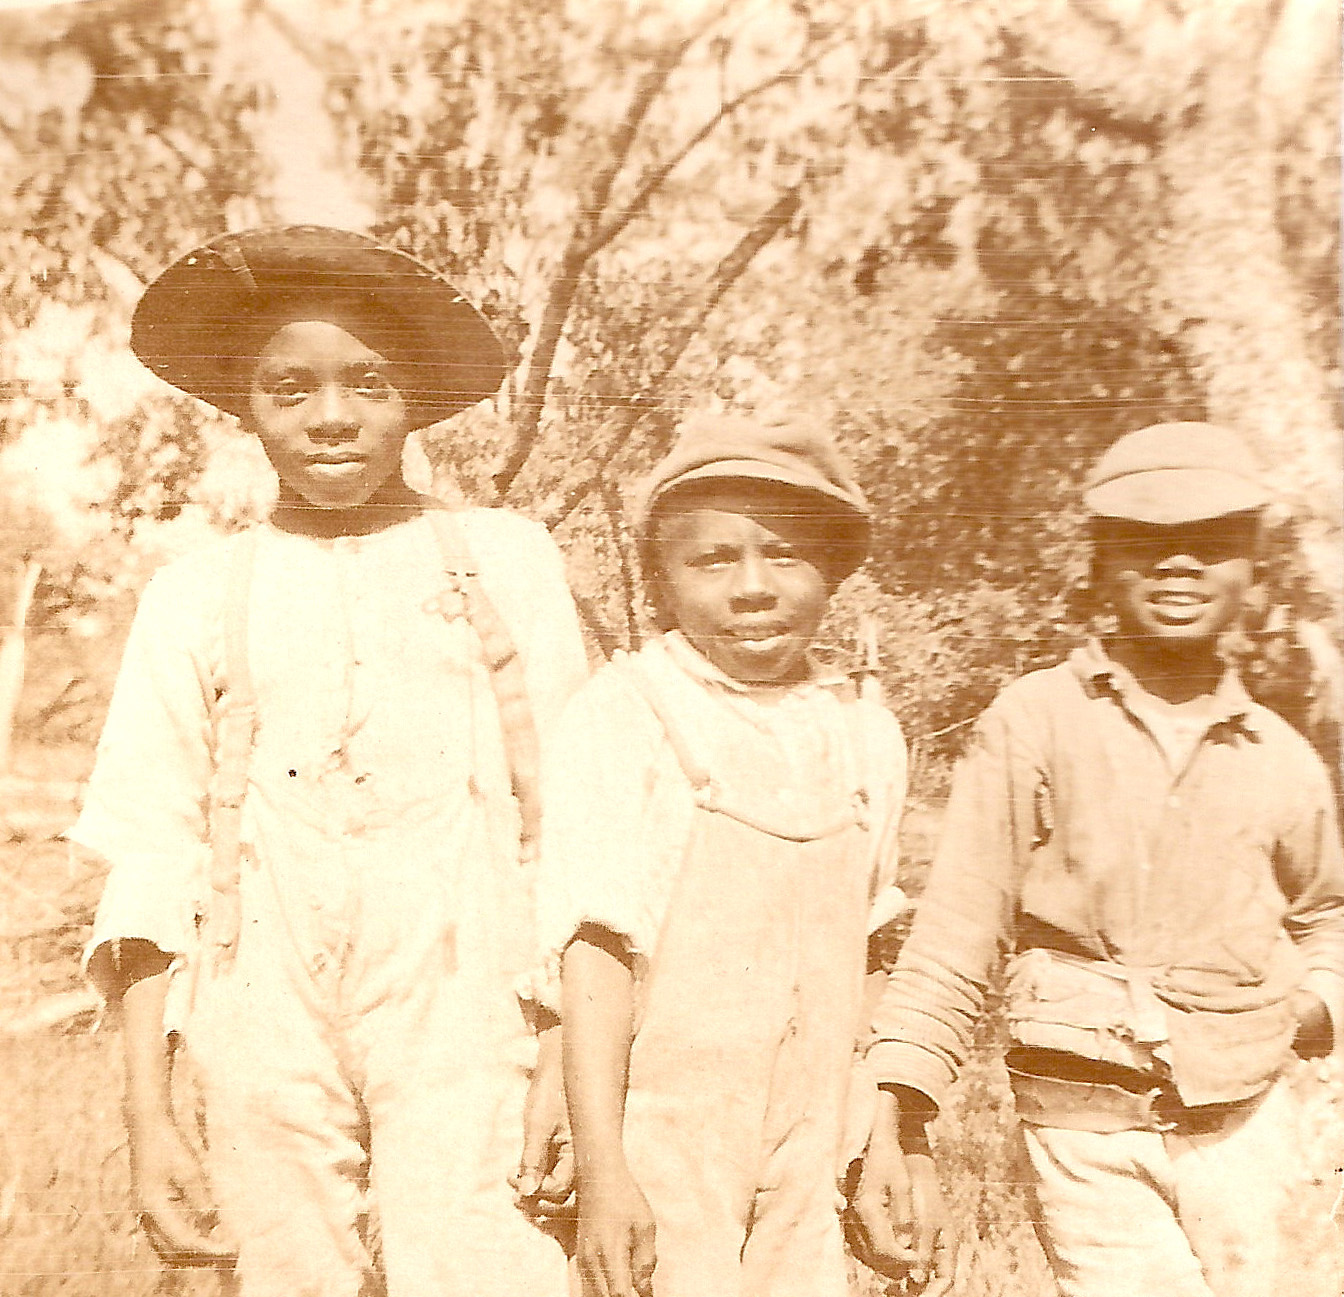 Sepia tone photograph of three young Black boys dressed in overalls and hats and smiling at the camera.